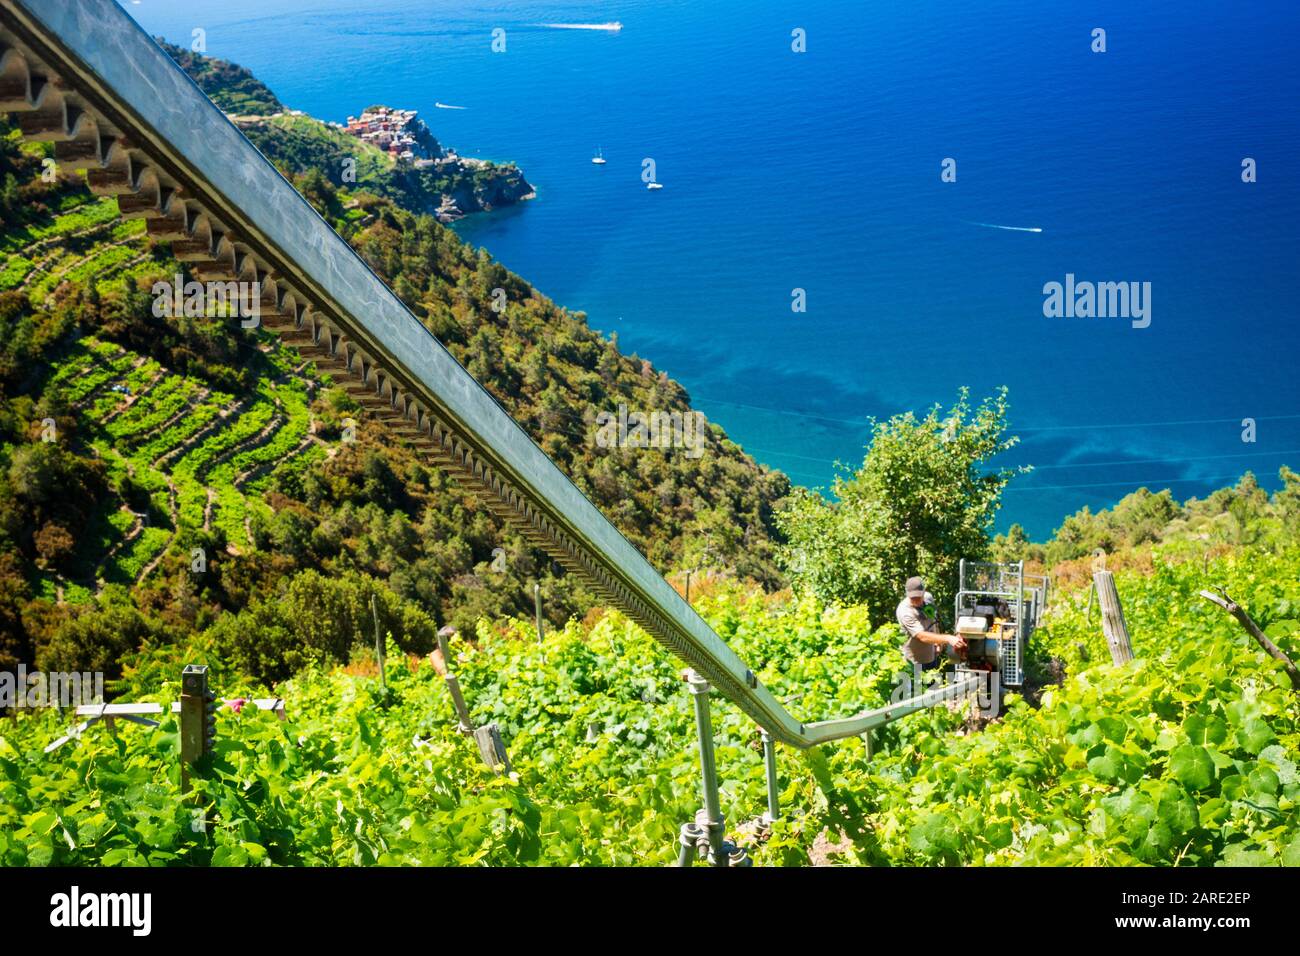 Monorail system used to access terraced vineyards in Cinque Terre near Volastra village Stock Photo